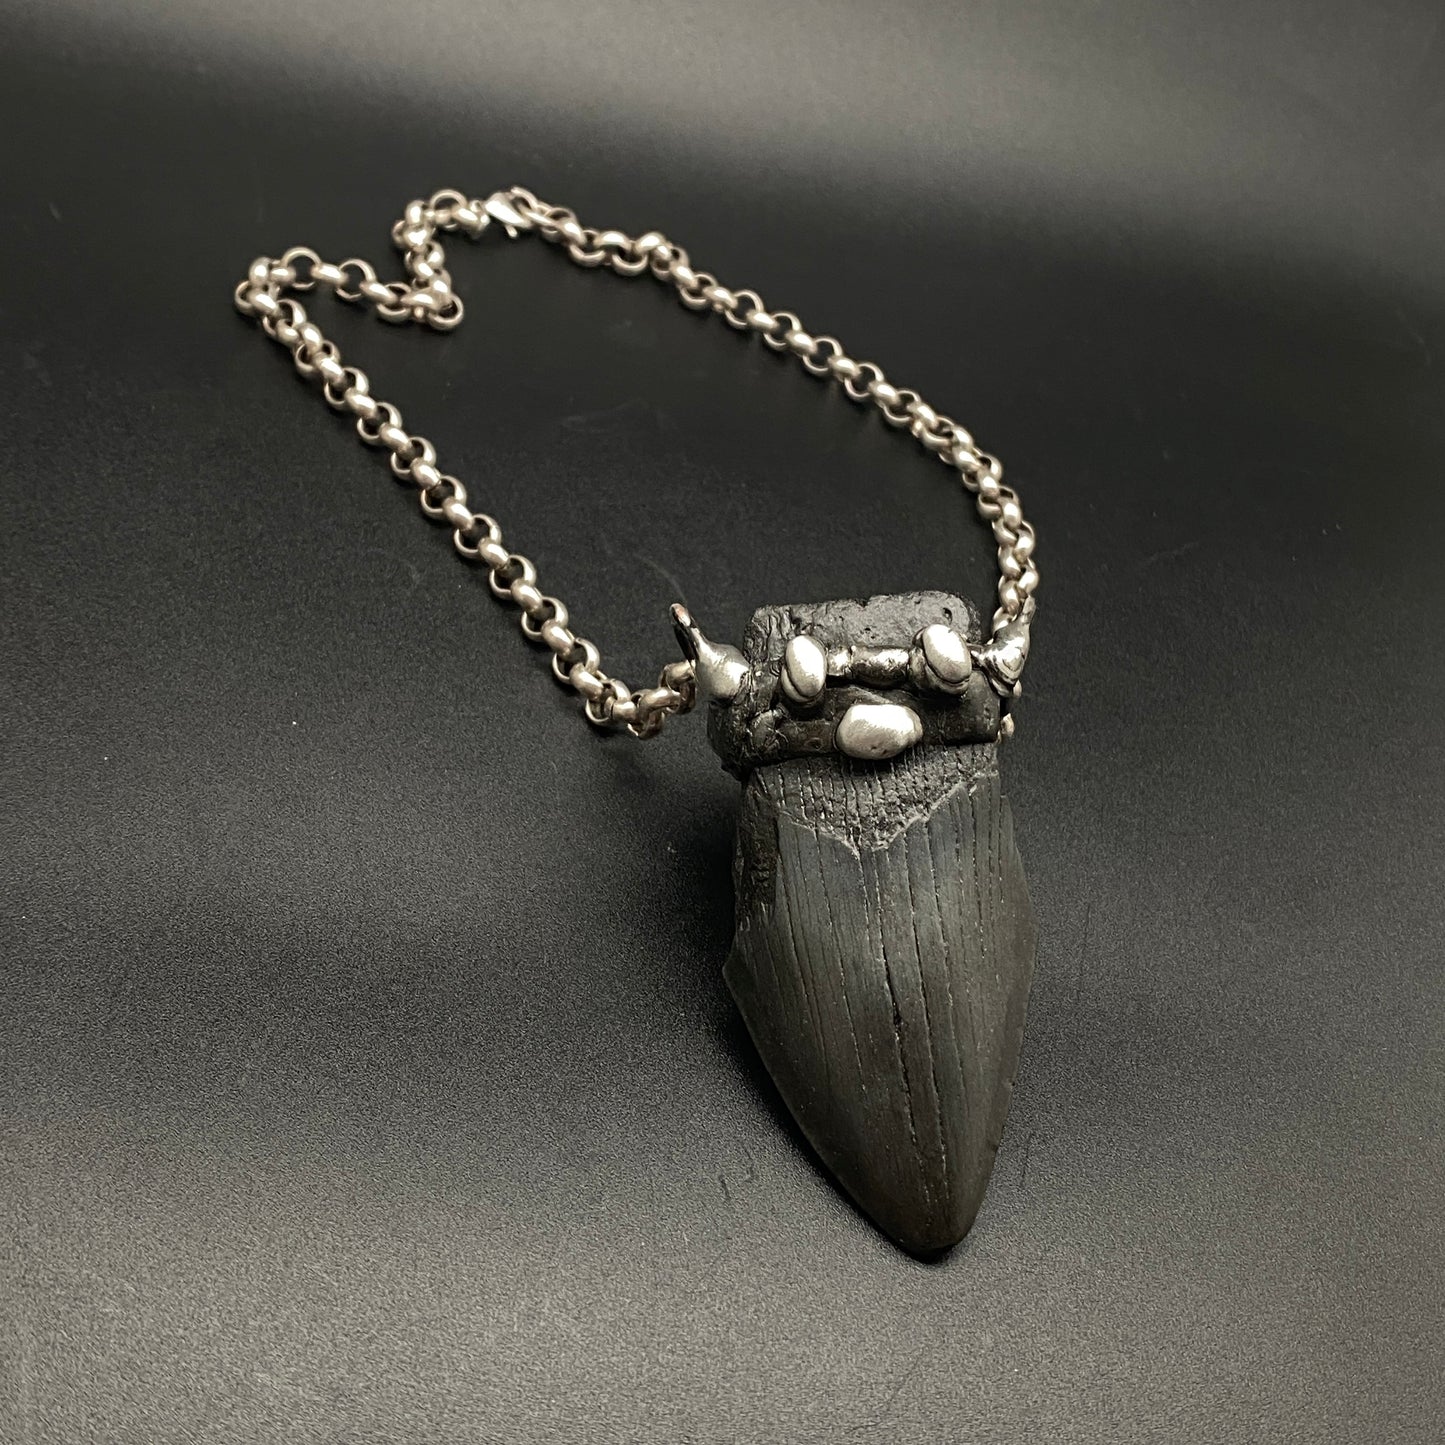 Aquatic Monster ~ Megalodon Tooth Necklace